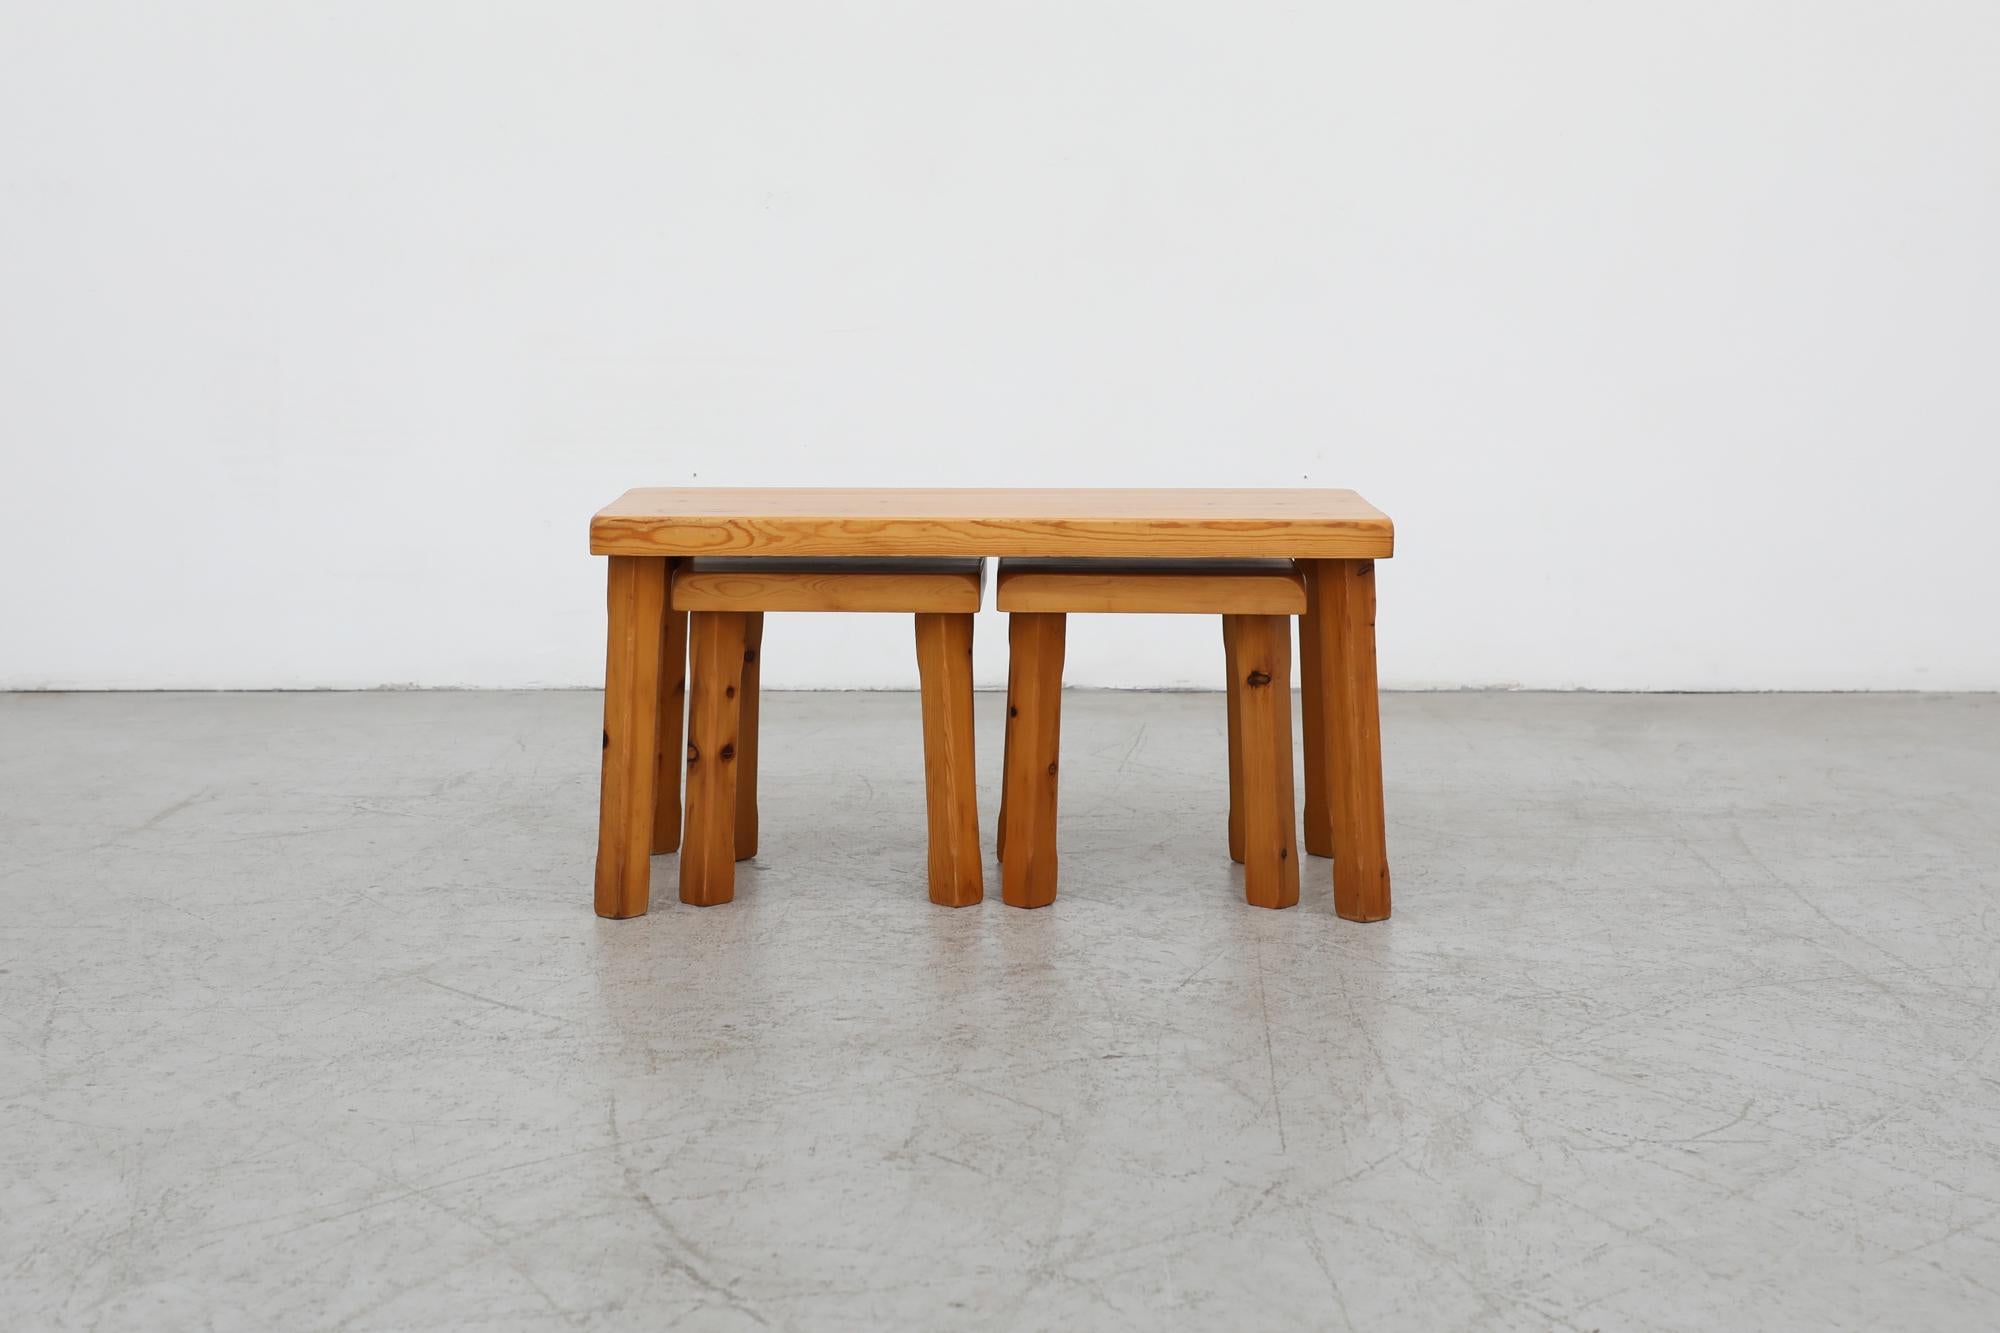 Beautiful set of 3 Charlotte Perriand style brutalist style pine nesting tables with hand carved square legs. One larger main table, with 2 smaller matching square tables (11.75 x 11.75 x 10.75) underneath. In good original condition with wear and